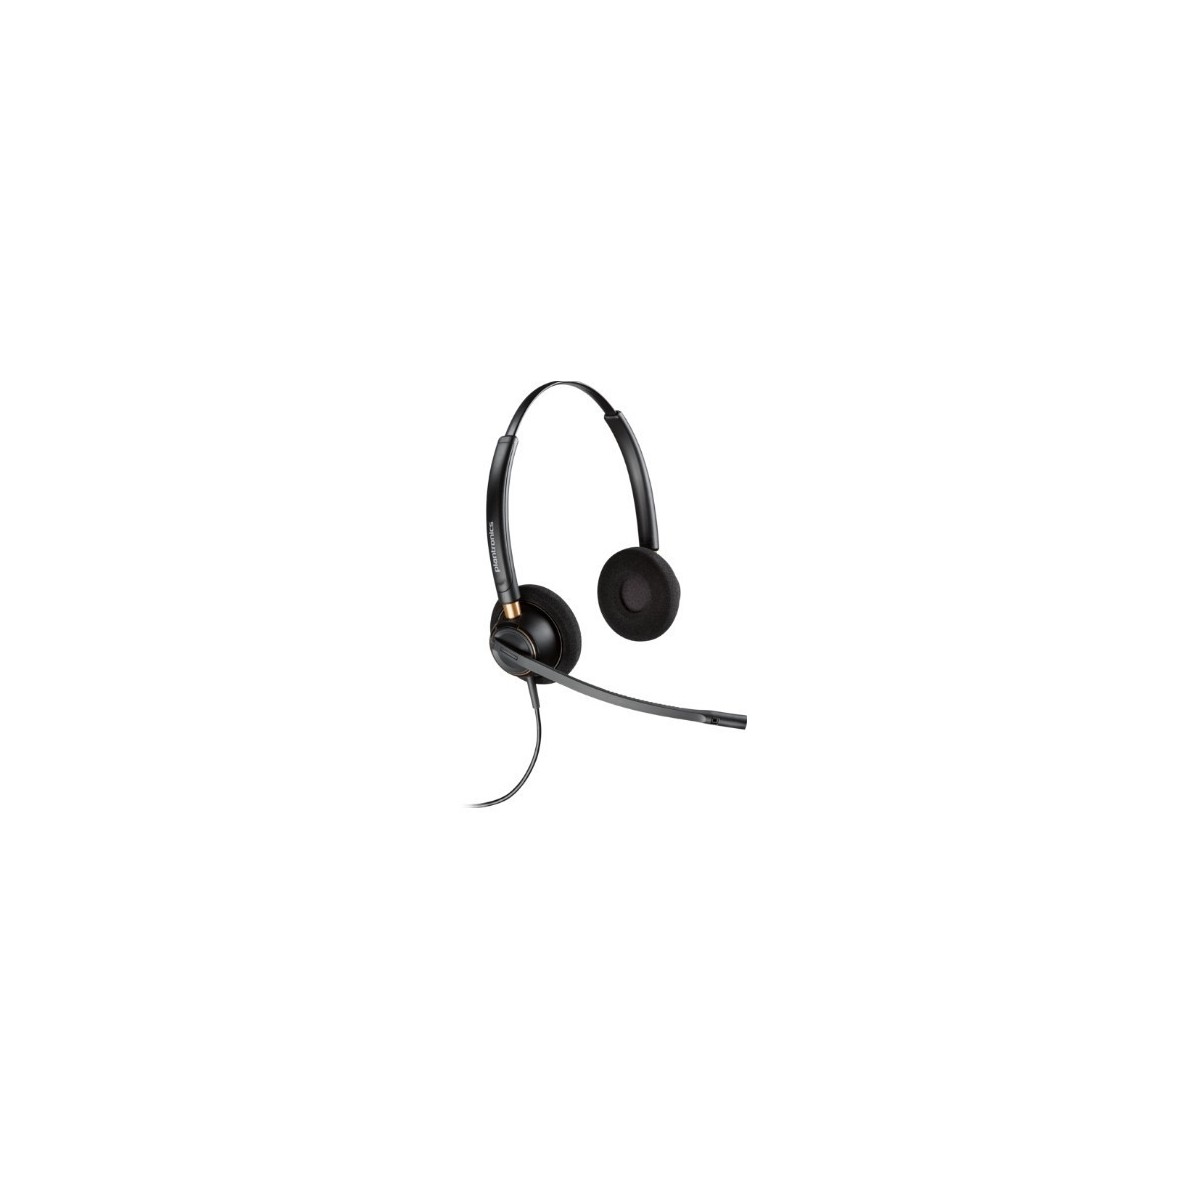 Poly HW520D - Headset - Head-band - Office/Call center - Black - Binaural - Wired